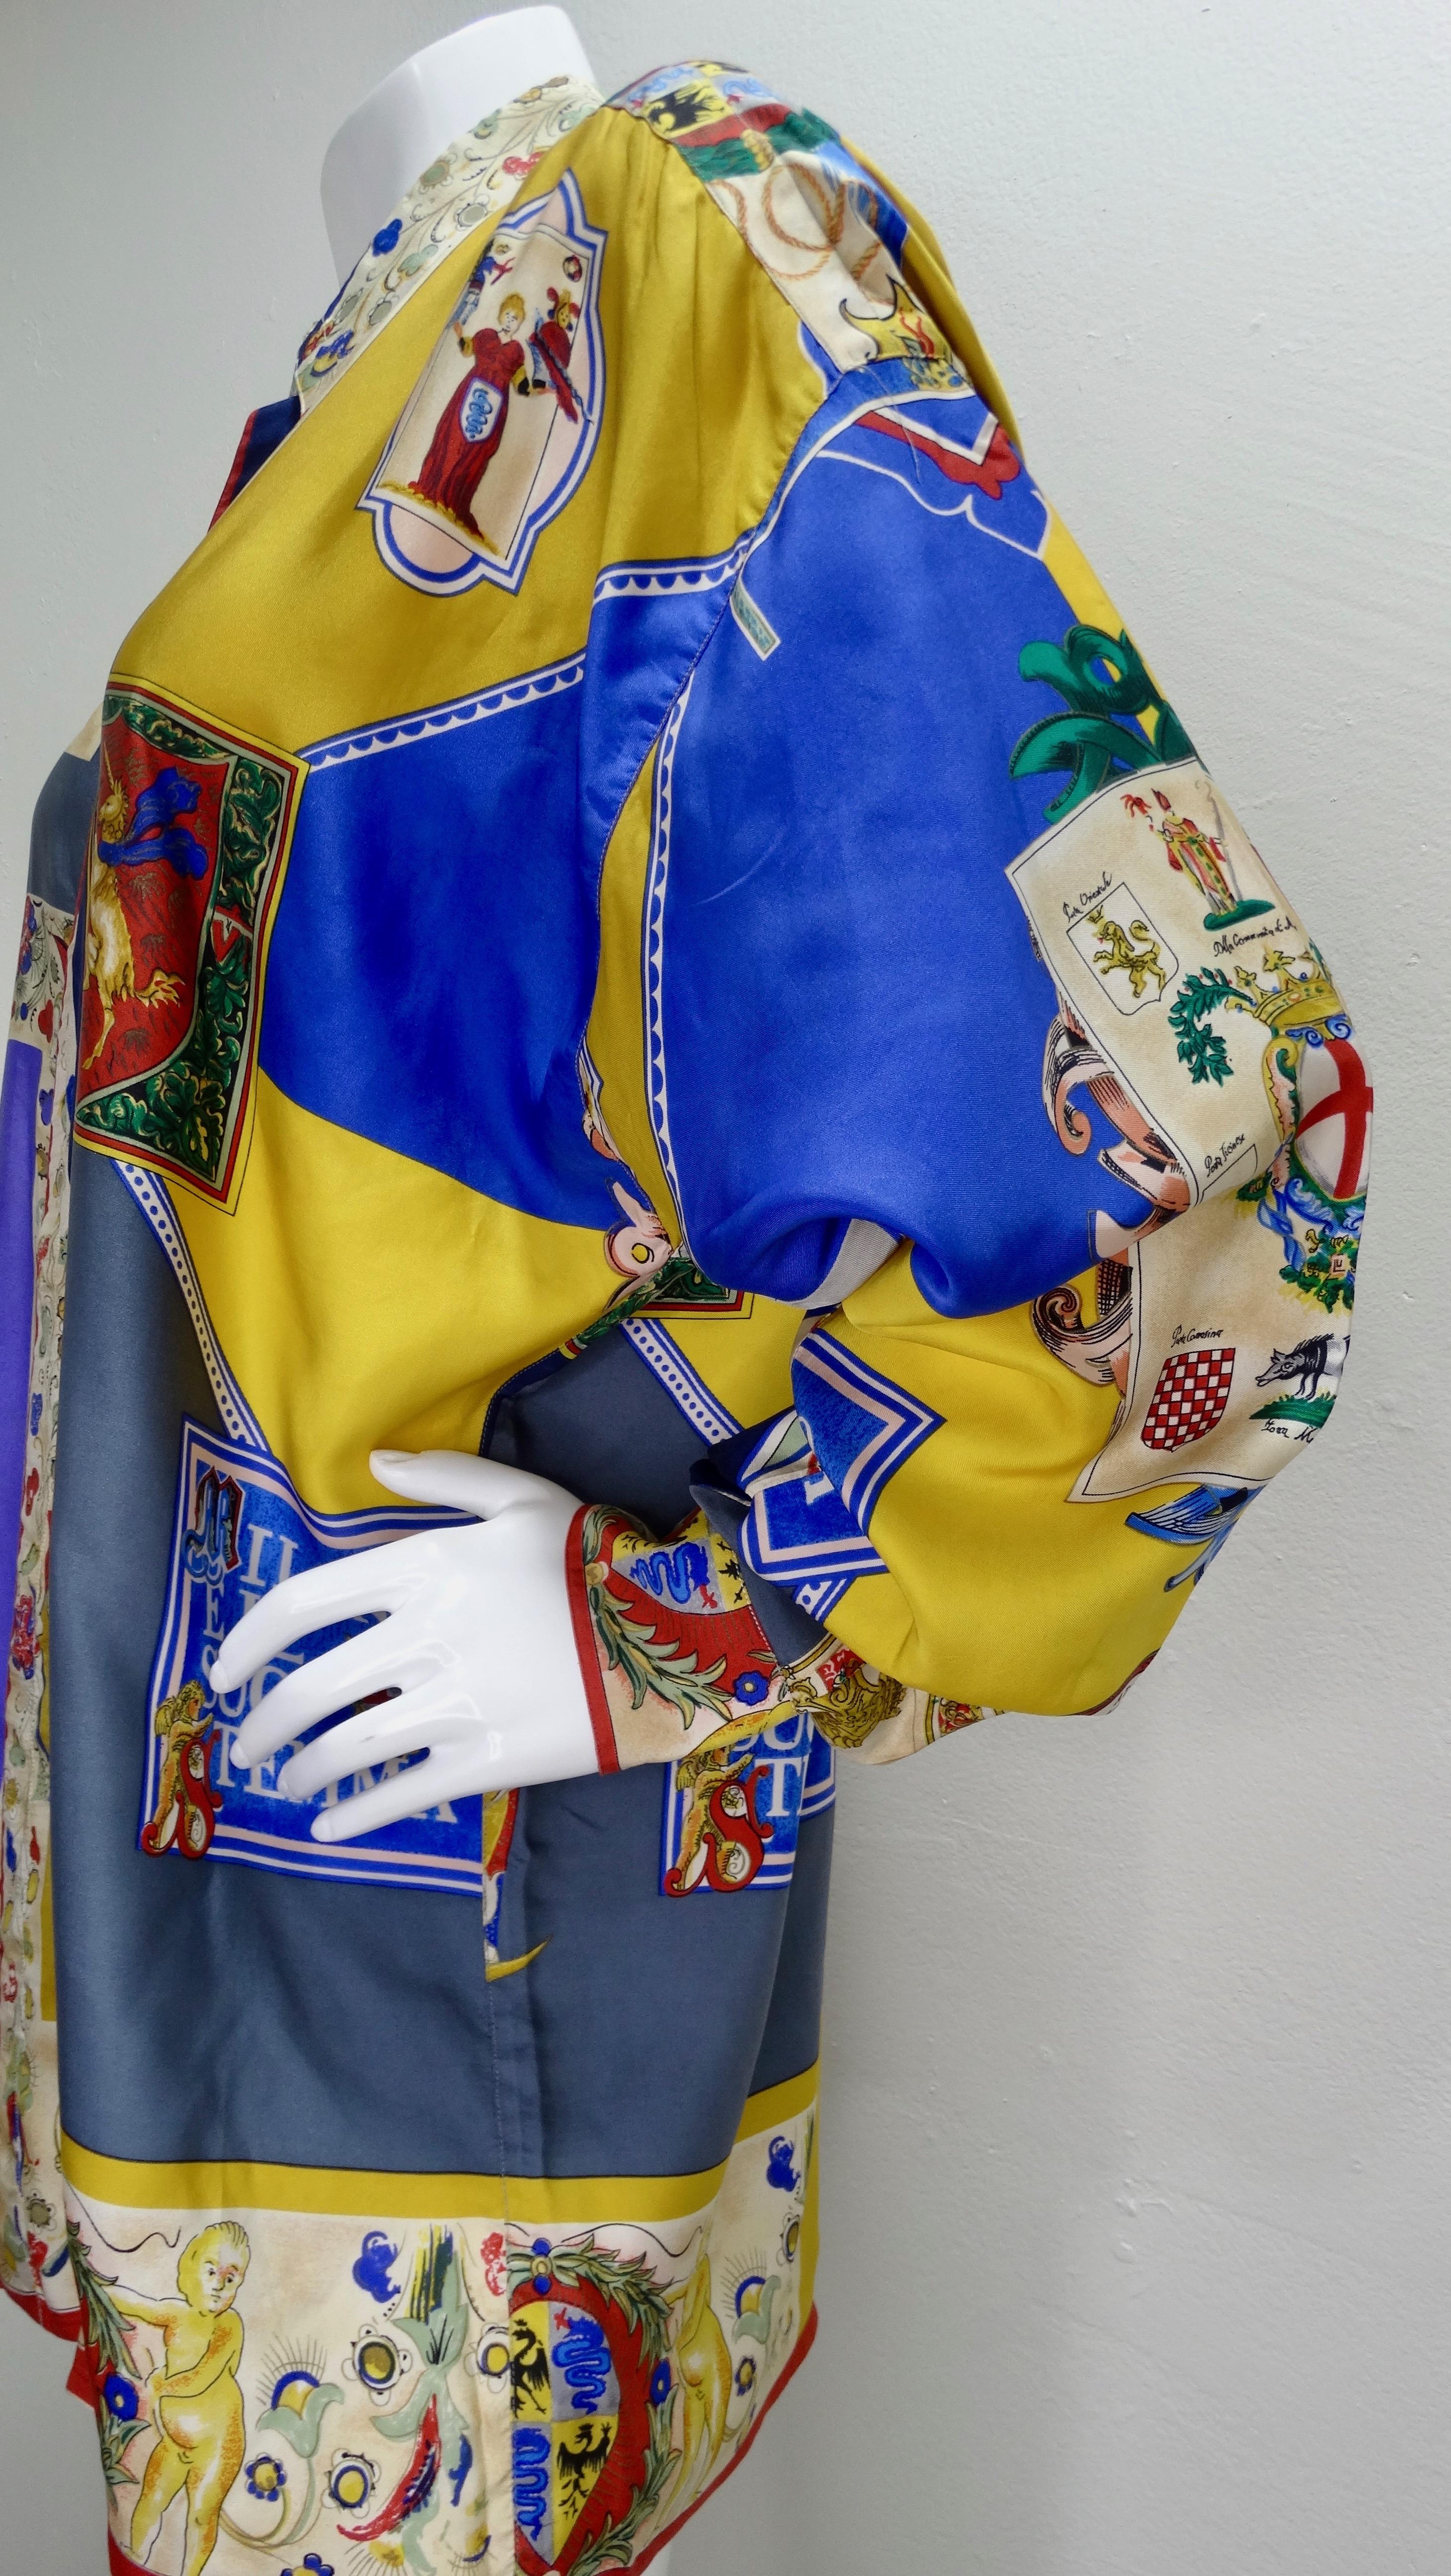 Gianni Versace 1990s Coat of Arms Silk Shirt  For Sale 5